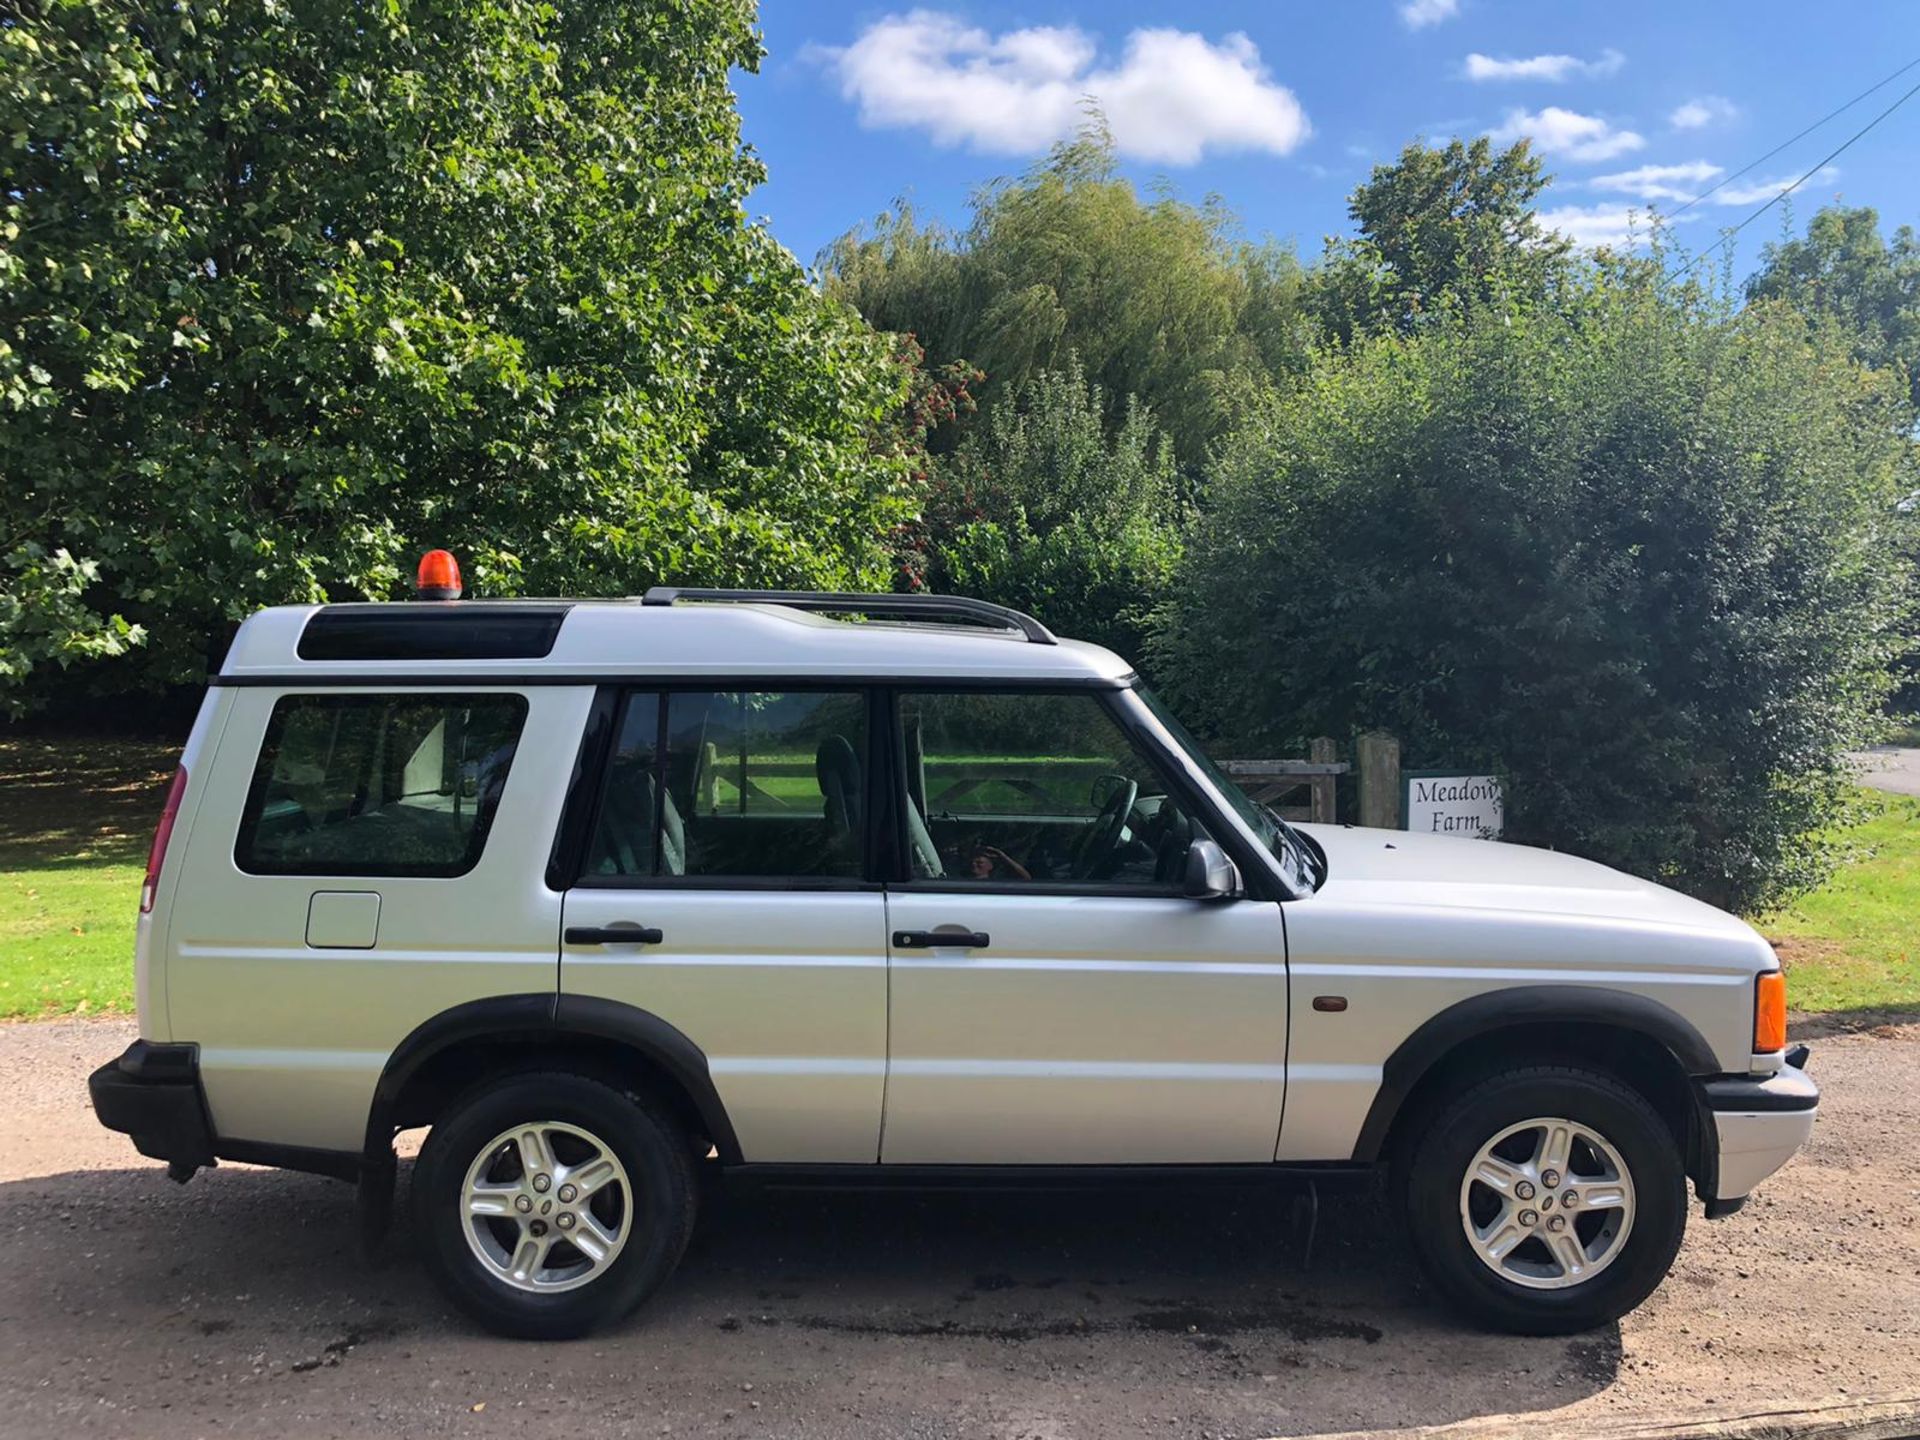 2002 LAND ROVER DISCOVERY TD5 GS SILVER ESTATE, 2.5 DIESEL ENGINE, 201,163 MILES *NO VAT* - Image 9 of 17